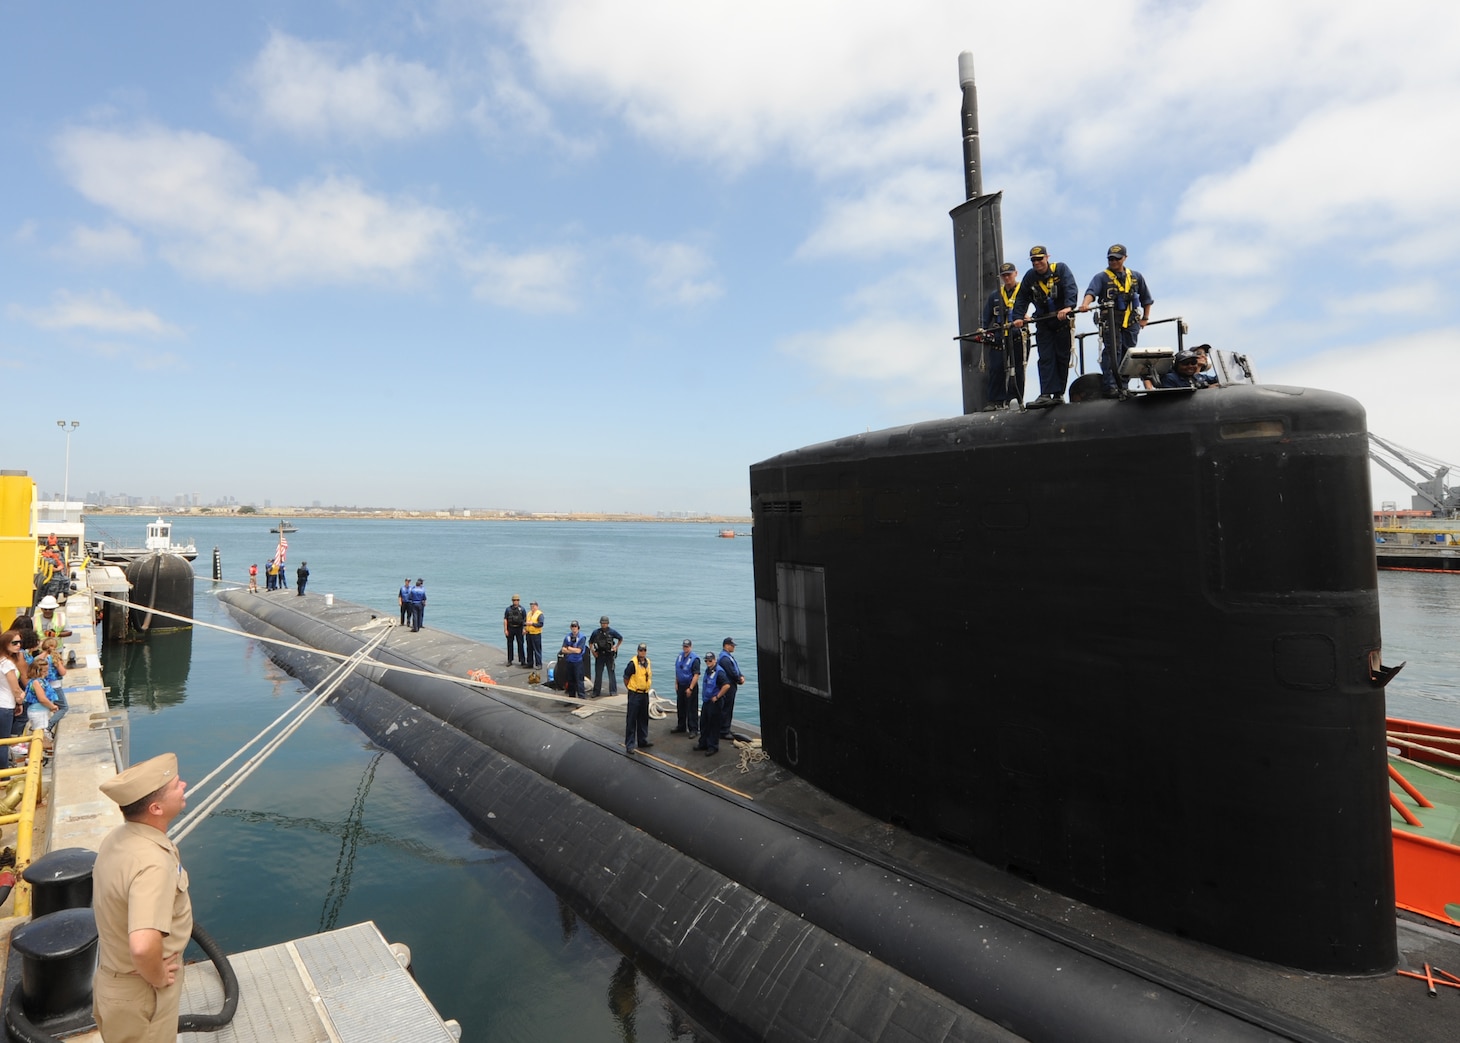 SAN DIEGO (June 18, 2013) Capt. Thomas Ishee, commander Submarine Squadron 11 (lower left) talks to Cmdr. Lincoln Reifsteck, commanding officer of the Los Angeles-class attack submarine USS Hampton (SSN 767), as the boat prepares to depart for a scheduled six-month deployment to the western Pacific region in support of the Chief of Naval Operations' Maritime Strategy, which includes maritime security, forward presence, sea control, and power projection. Hampton was commissioned November 16, 1993 and is named after Hampton, Iowa, S.C. and Va. Displacing more than 6,900 tons, Hampton has a crew of nearly 140 Sailors and is one of six Los Angeles-class, fast-attack submarines homeported in San Diego. U.S. Navy photo by Mass Communication Specialist 2nd Class Kyle Carlstrom. (Released)